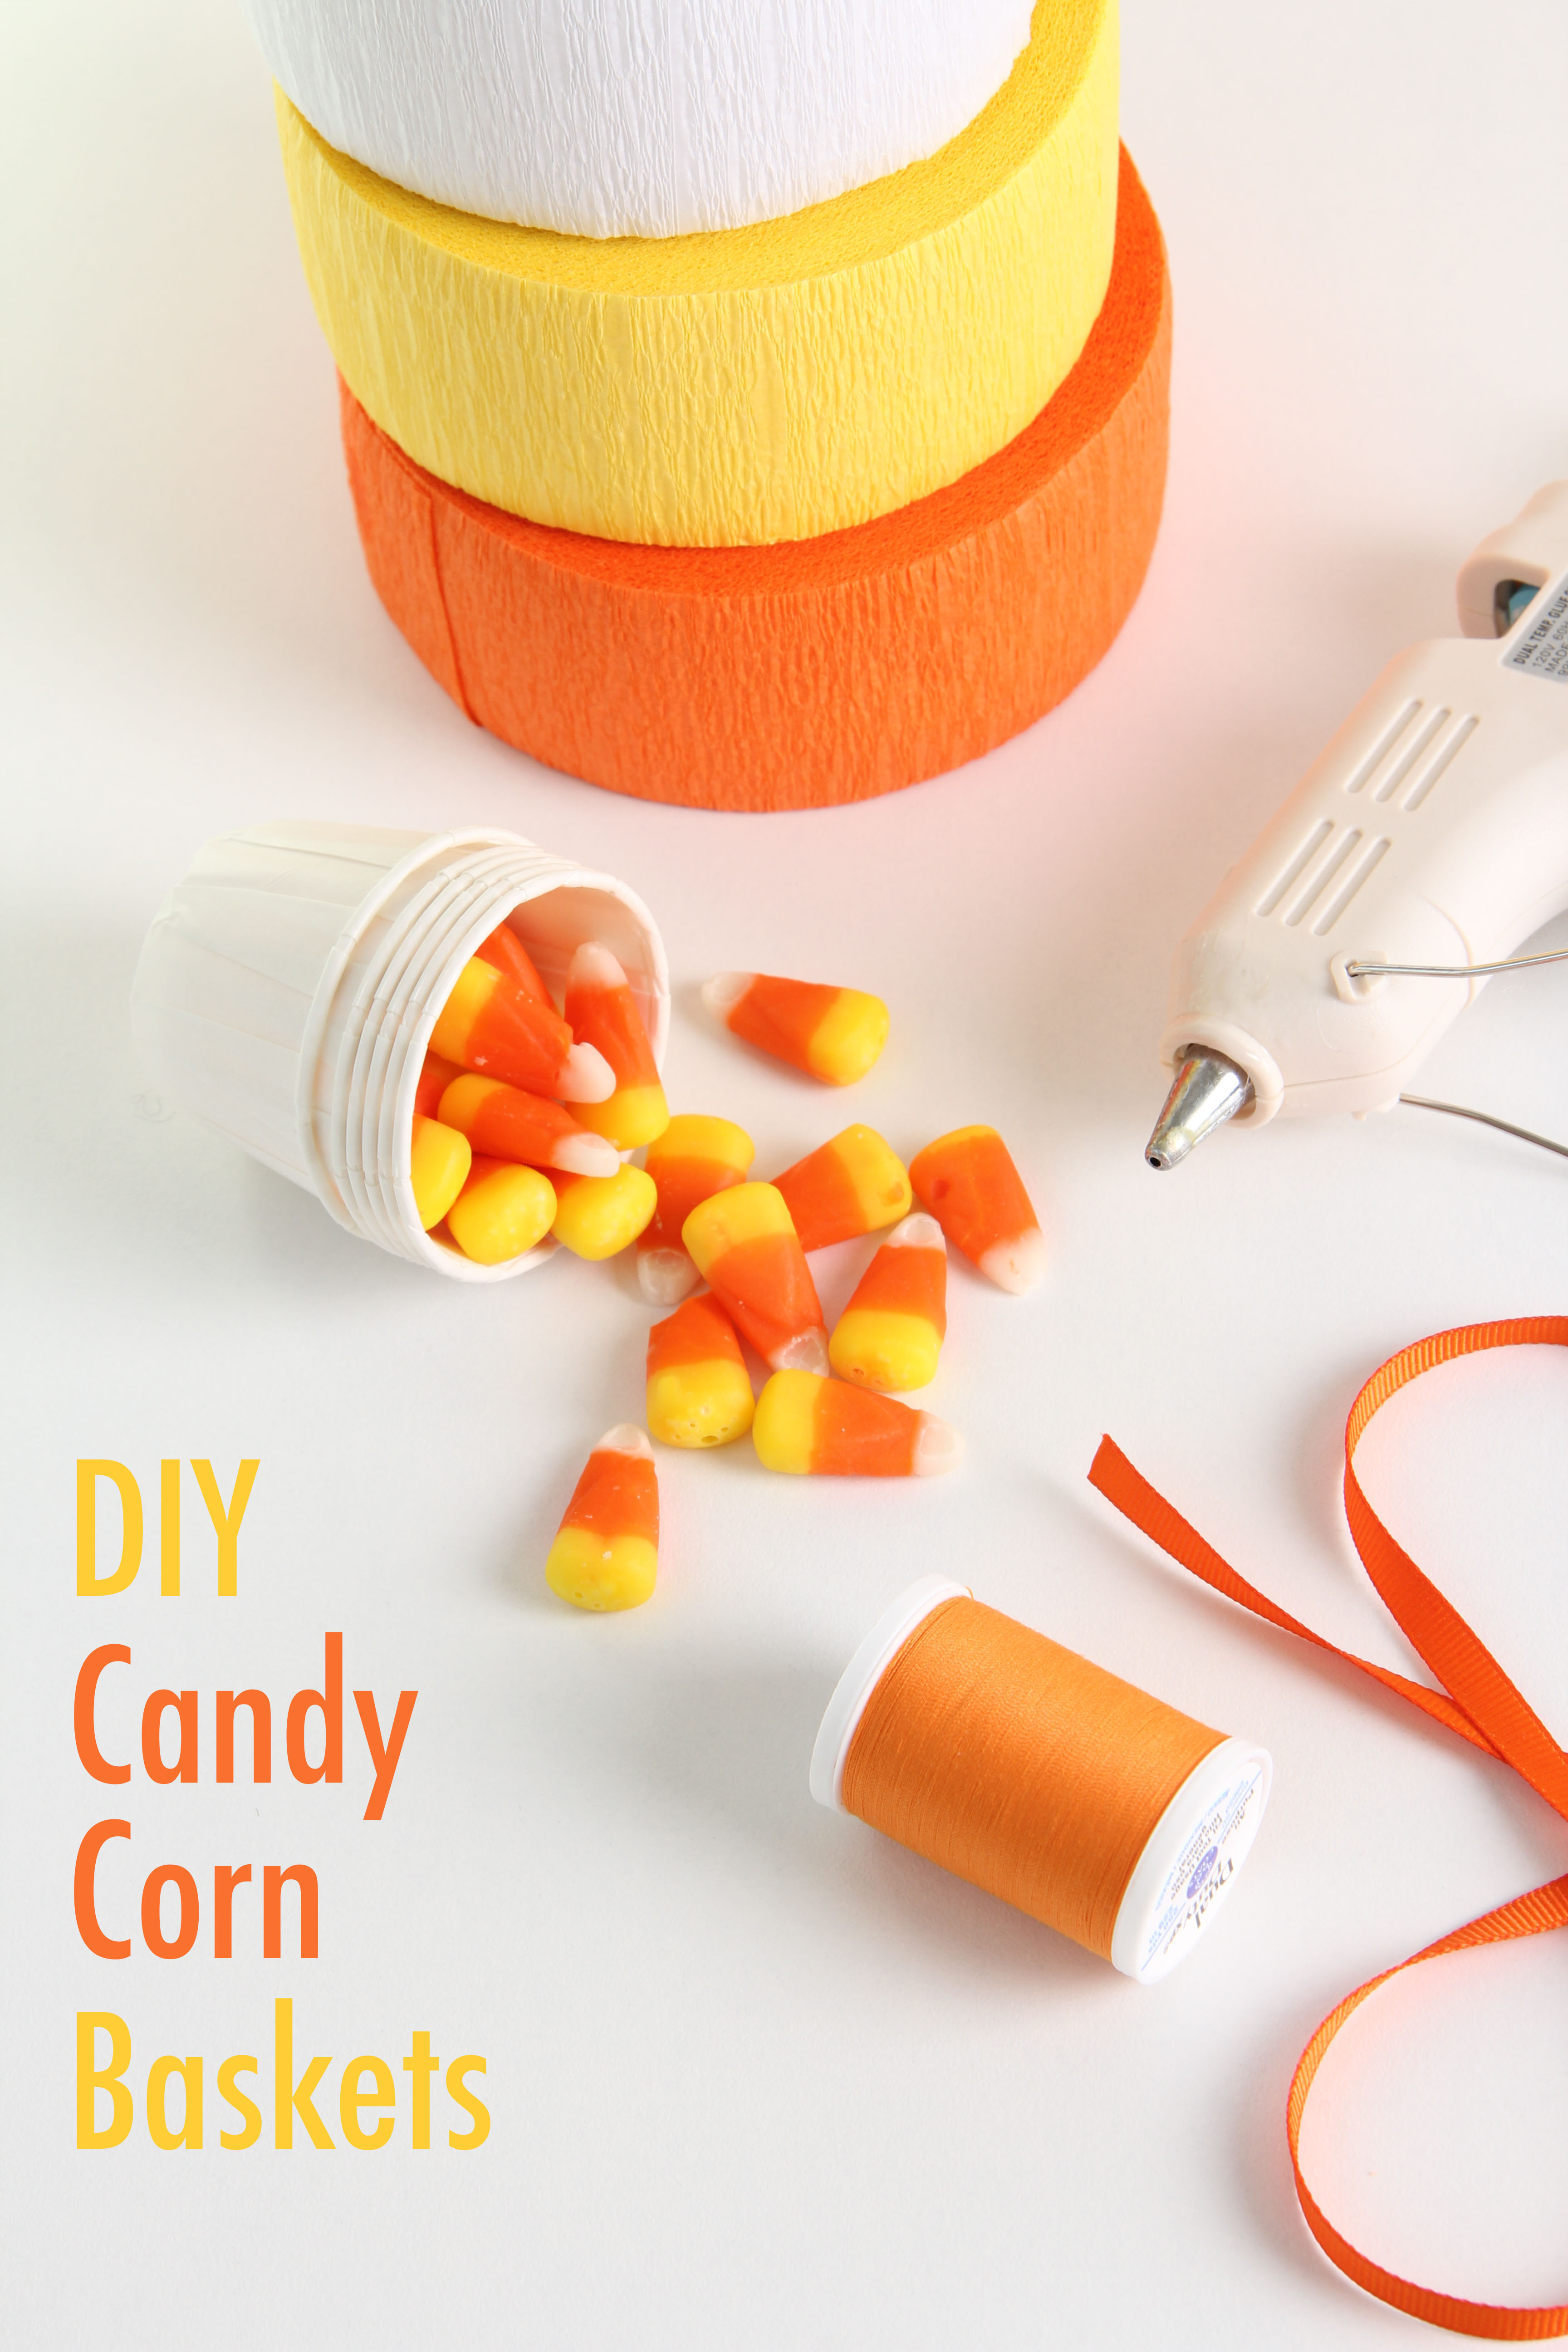 Only a few supplies are needed to make these DIY individual candy corn baskets. All you need are some crepe paper streamers, matching thread, and condiments cups.